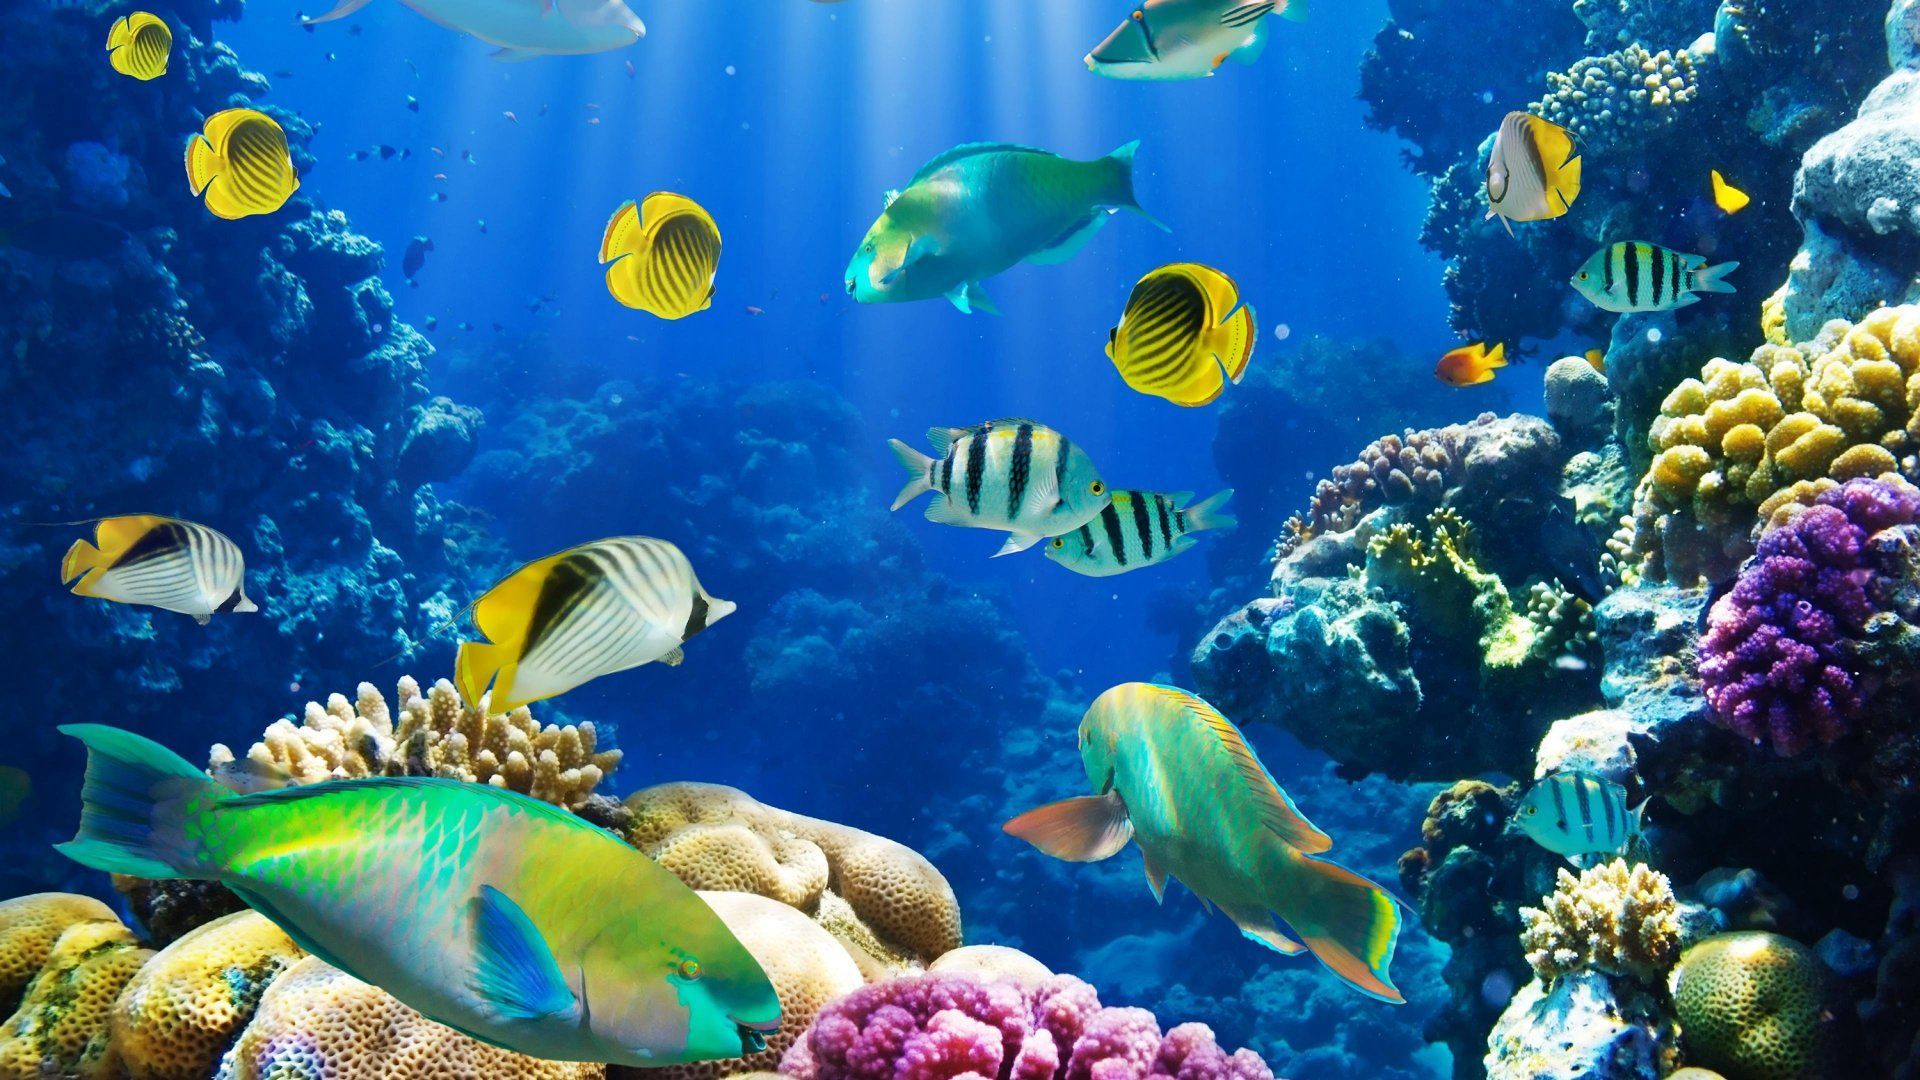 Today we are going to give some information about the fishes and the different kinds of the fishes. Descr. Fish background, Fish wallpaper, Tropical fish aquarium